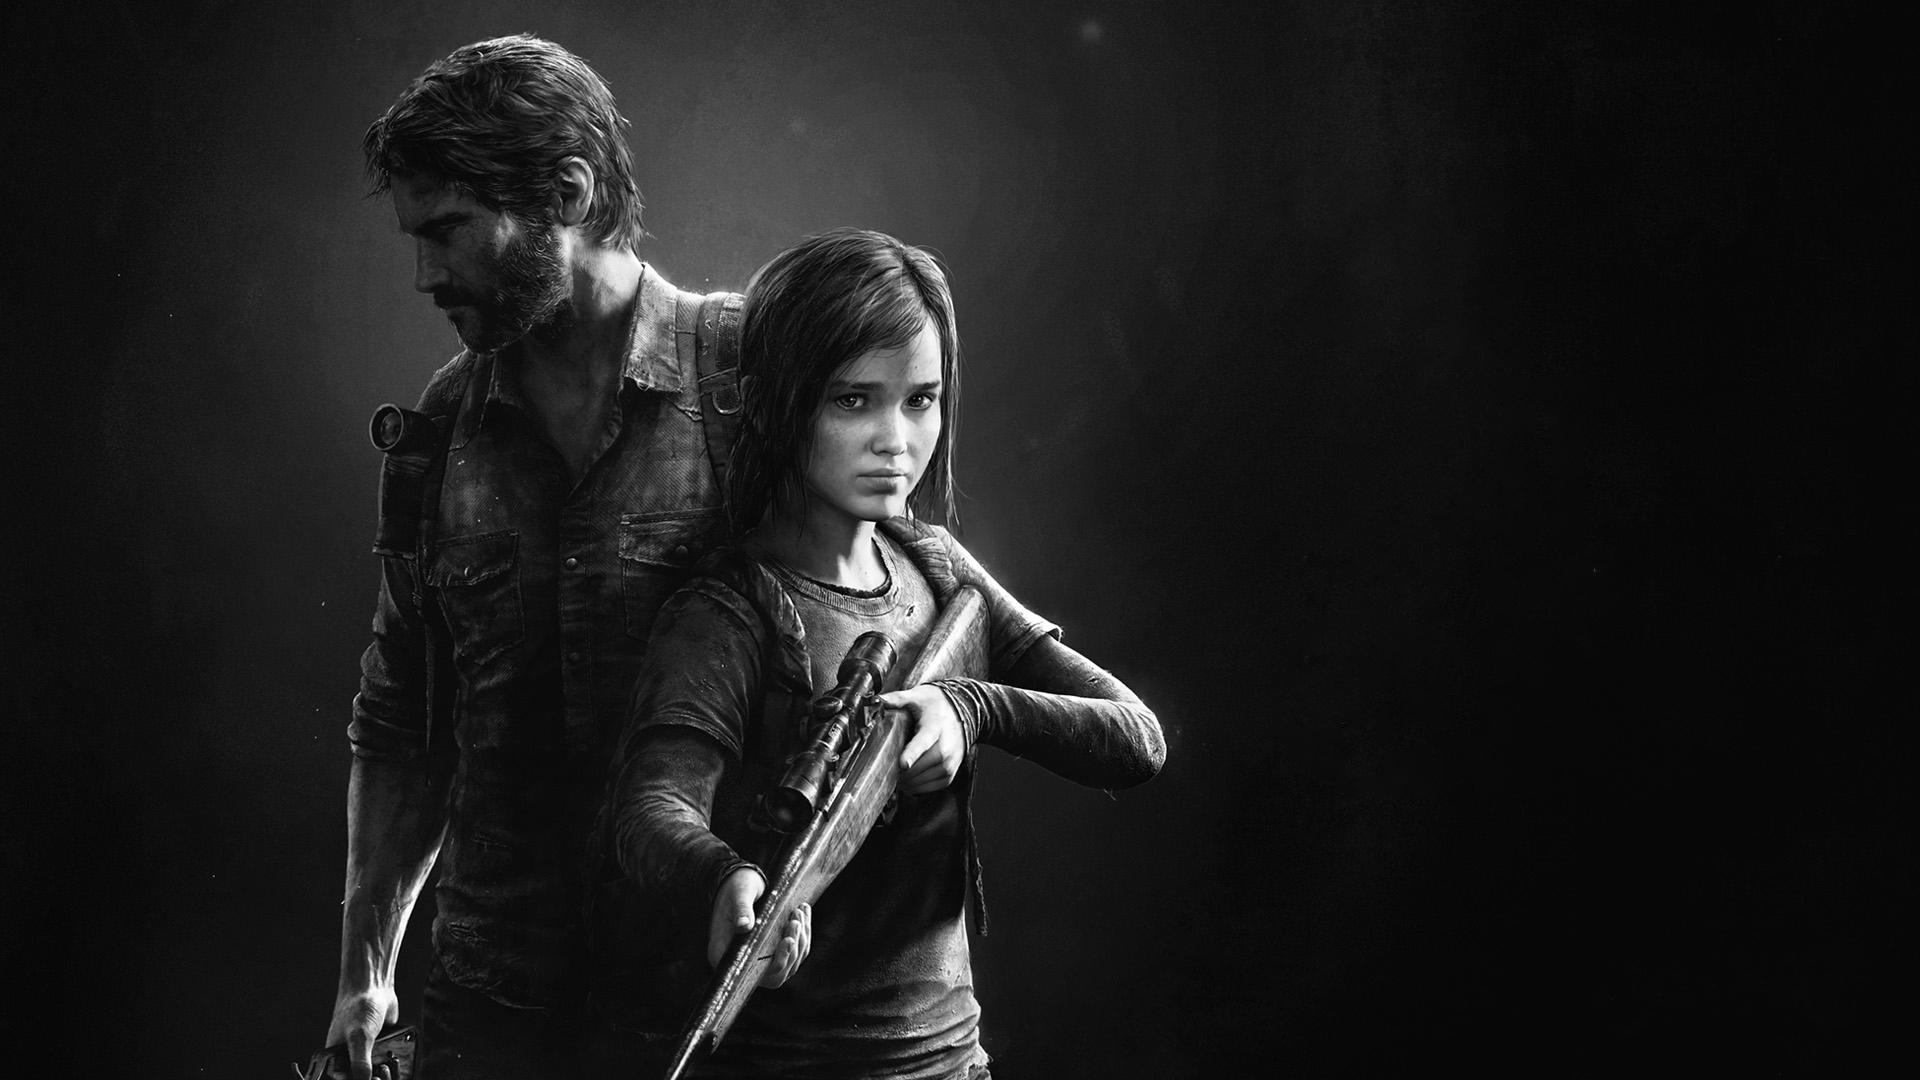 download free the last of us remastered full game